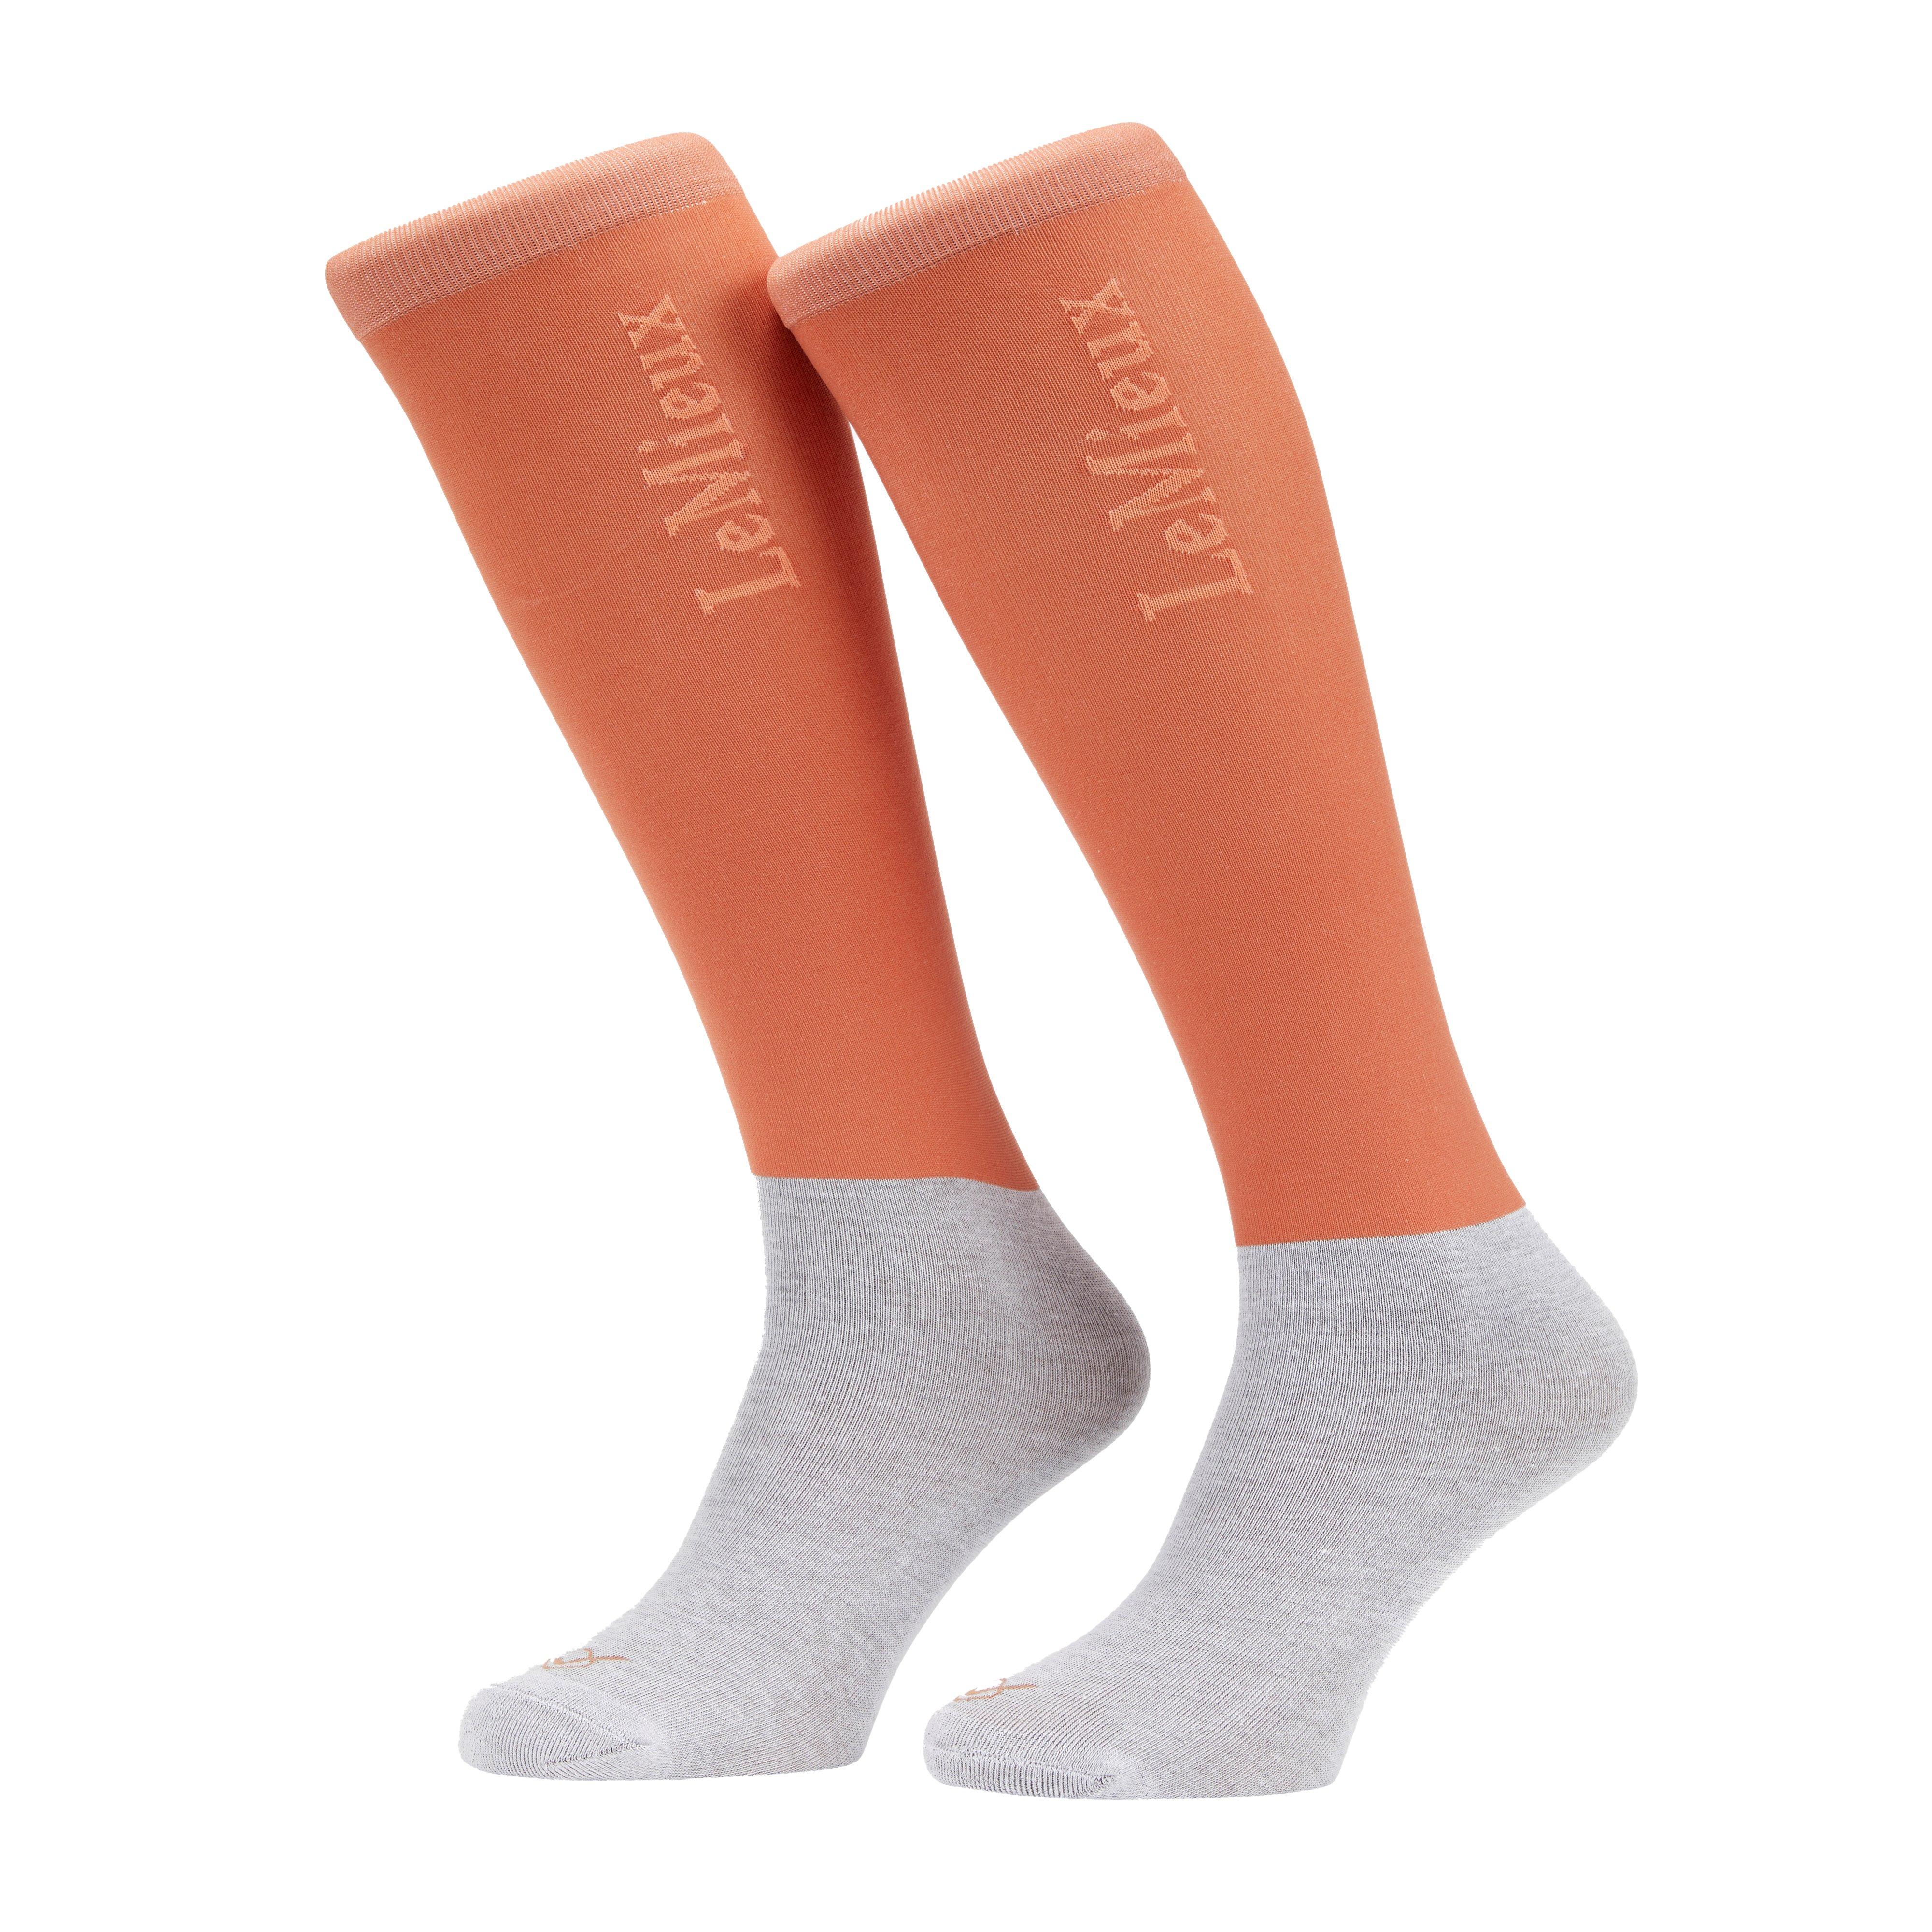 Competition Socks 2 Pack Apricot